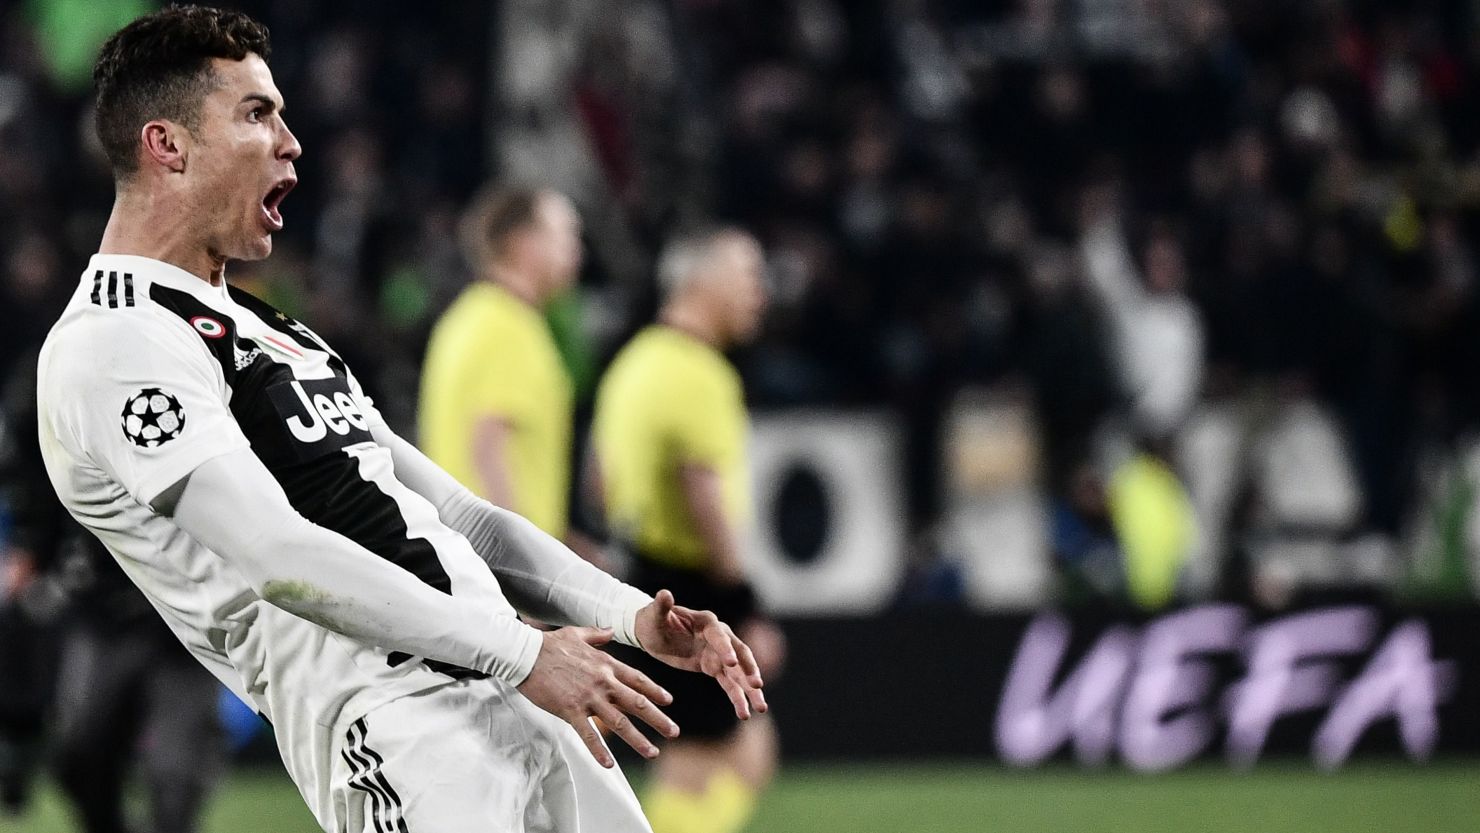 Cristiano Ronaldo mimicked Diego Simeone's celebration after helping Juve eliminate Atleti from the Champions League.